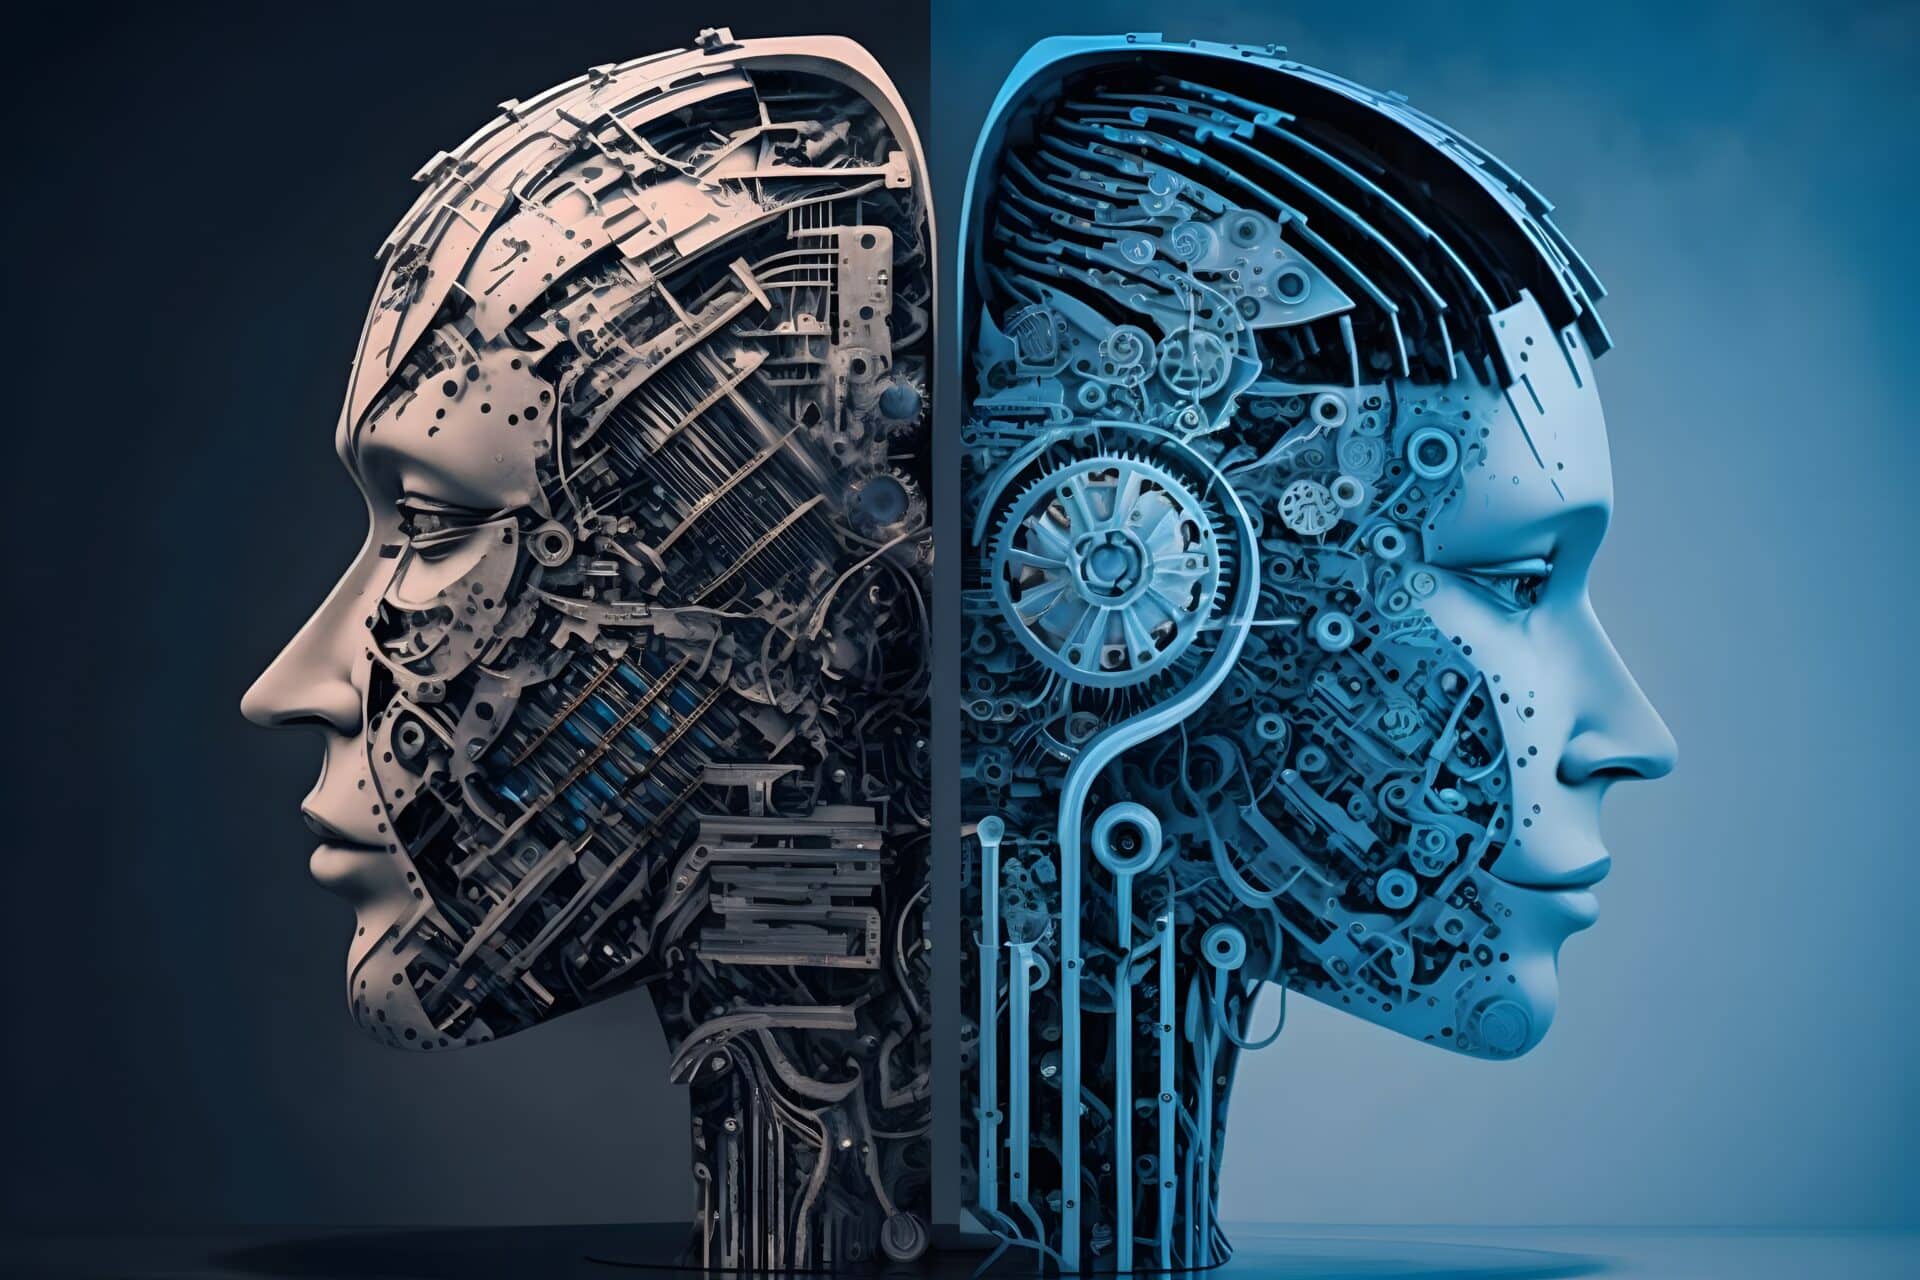 New hearings on artificial intelligence (AI) will feature representatives from Facebook, Software Alliance and Tesla.